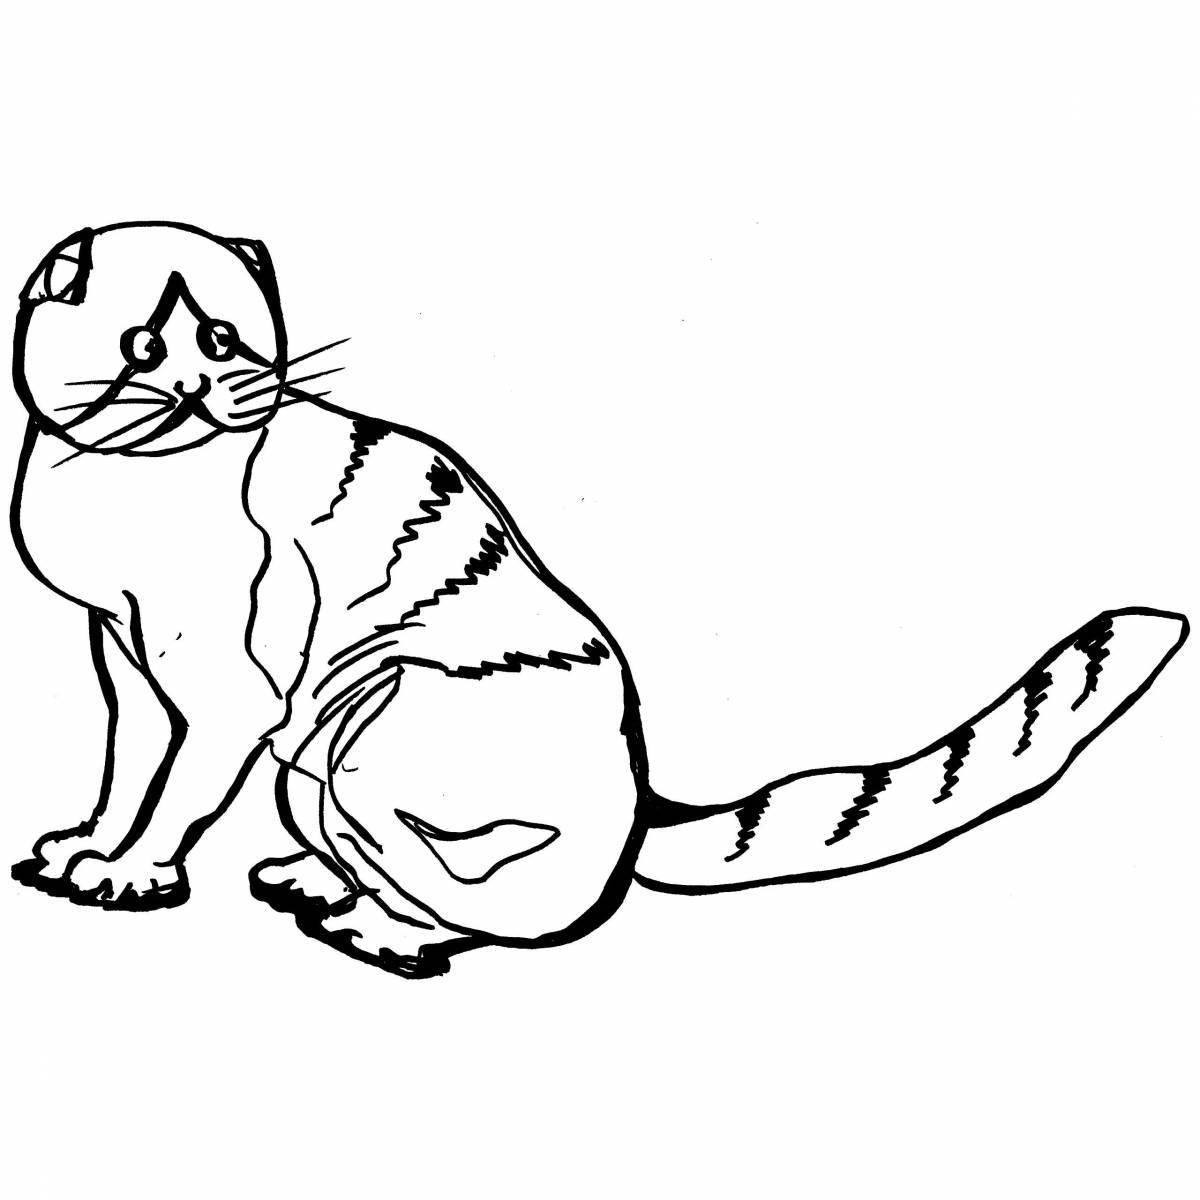 Snuggly coloring page fold kitten